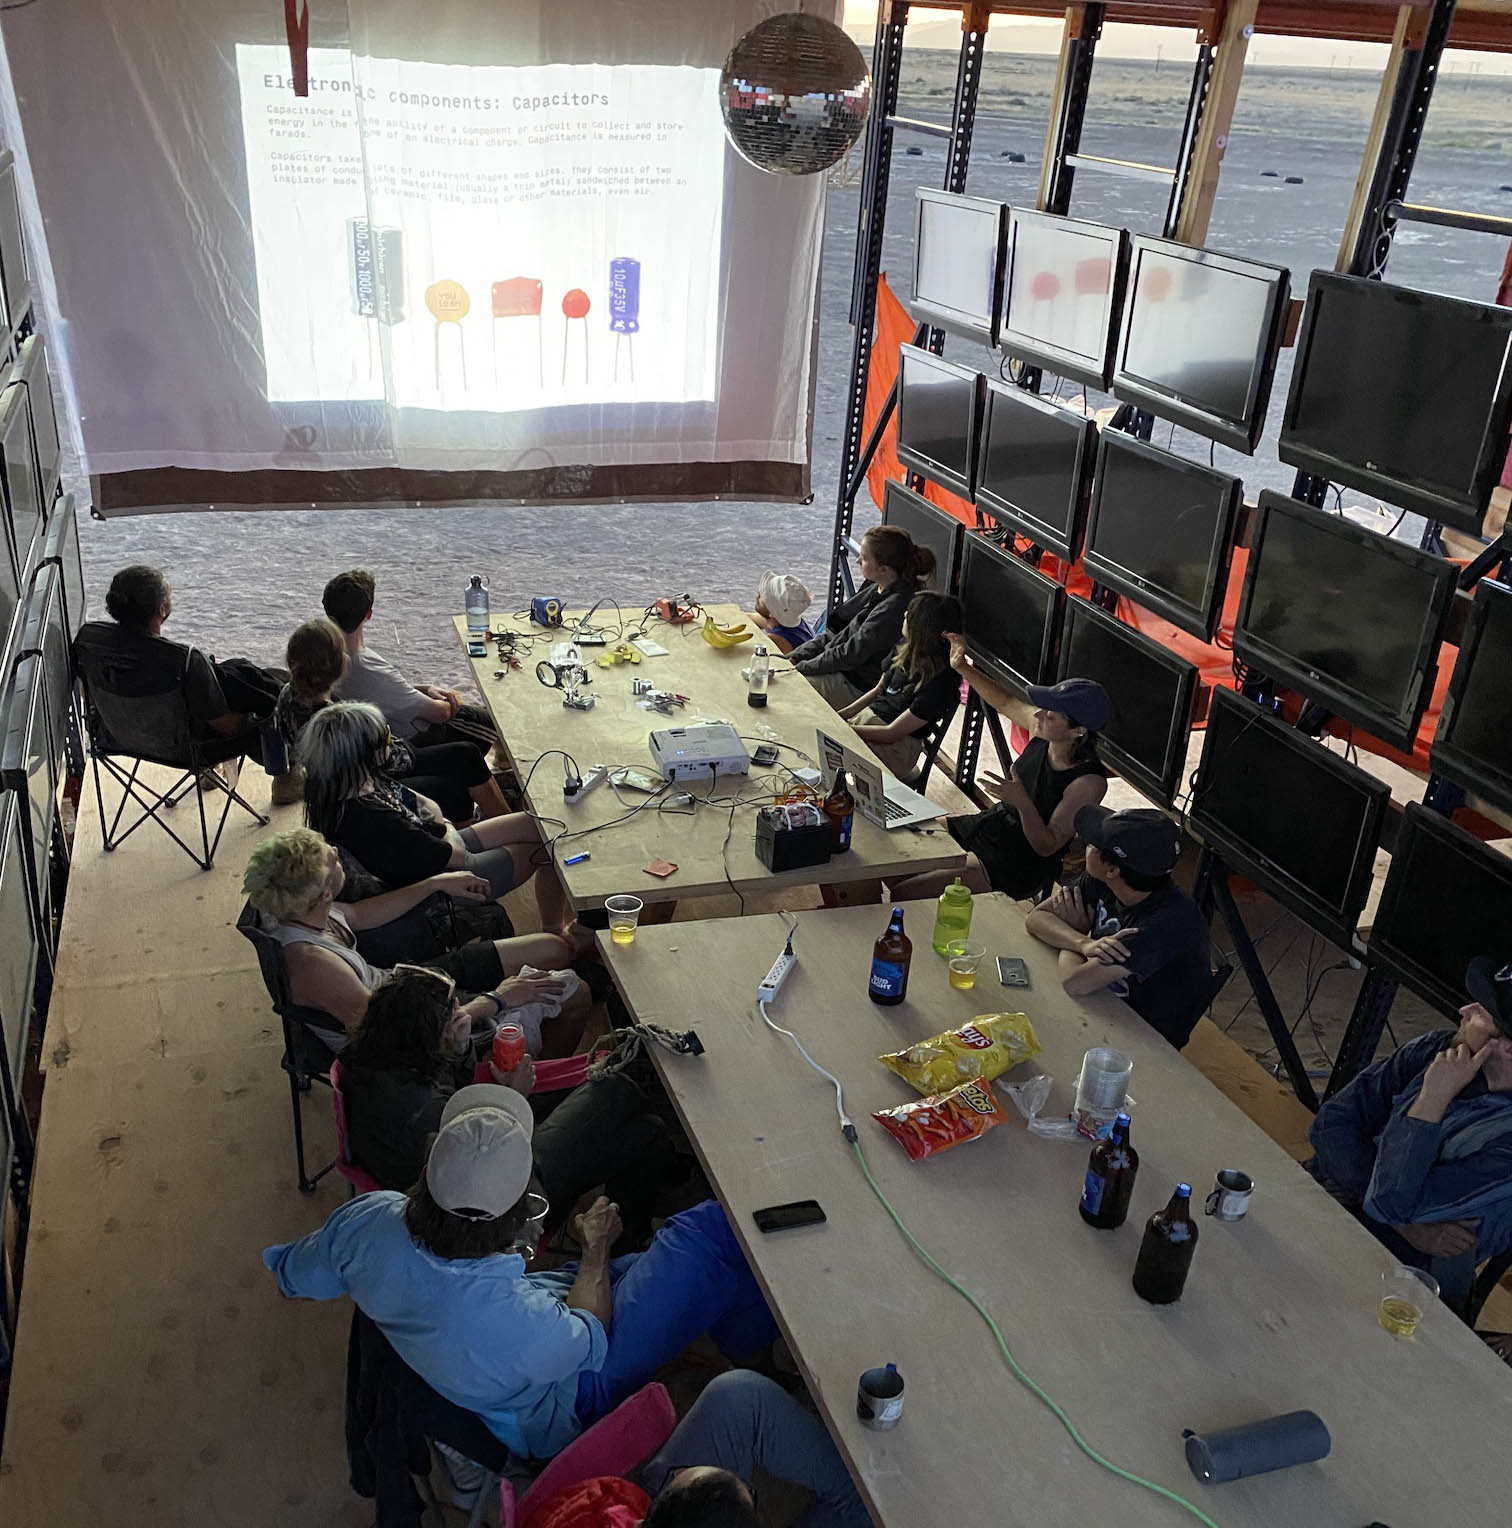 People attending an electronics workshop inside a structure in the desert